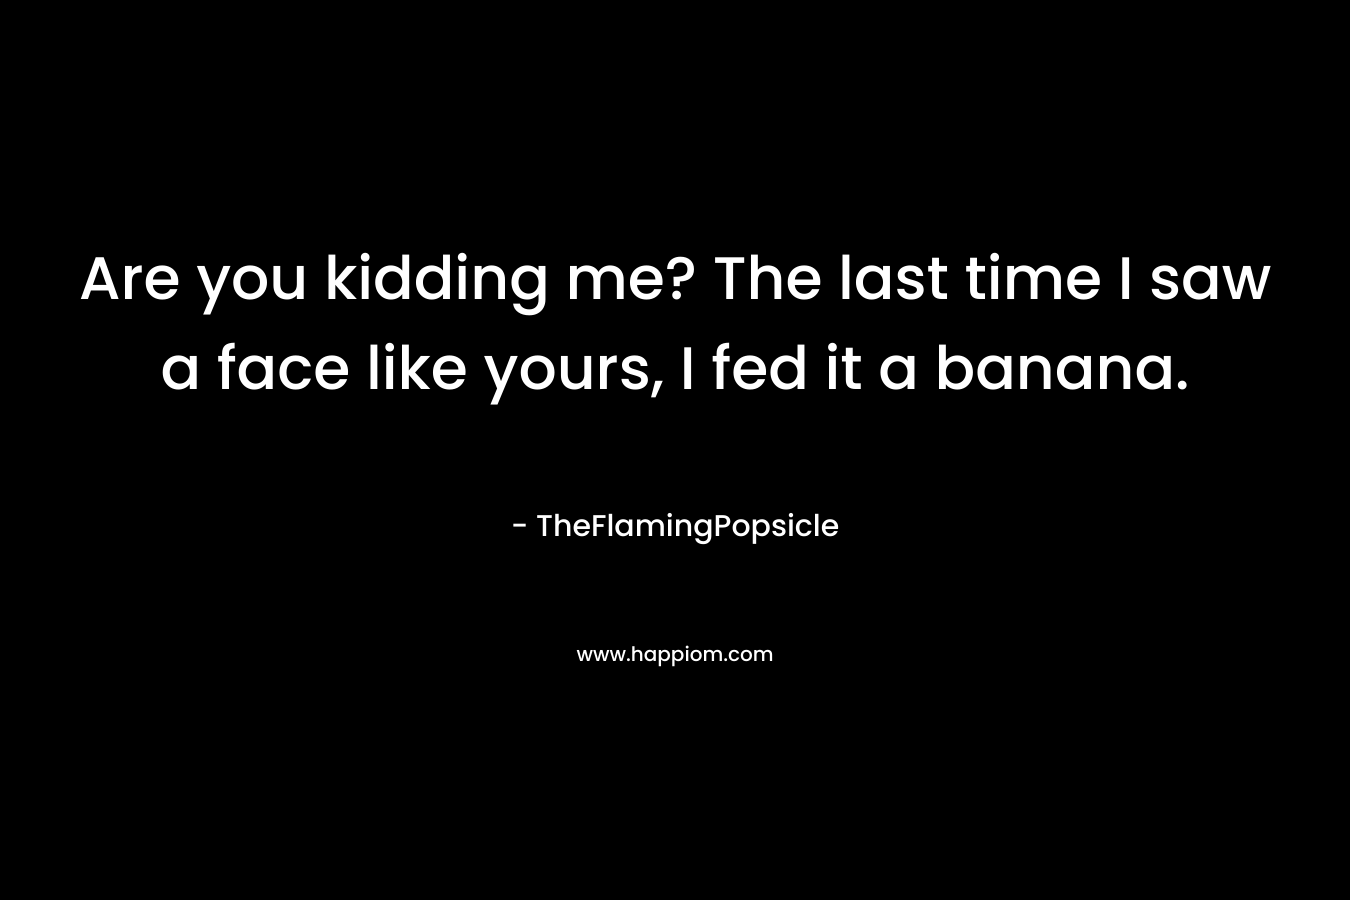 Are you kidding me? The last time I saw a face like yours, I fed it a banana. – TheFlamingPopsicle